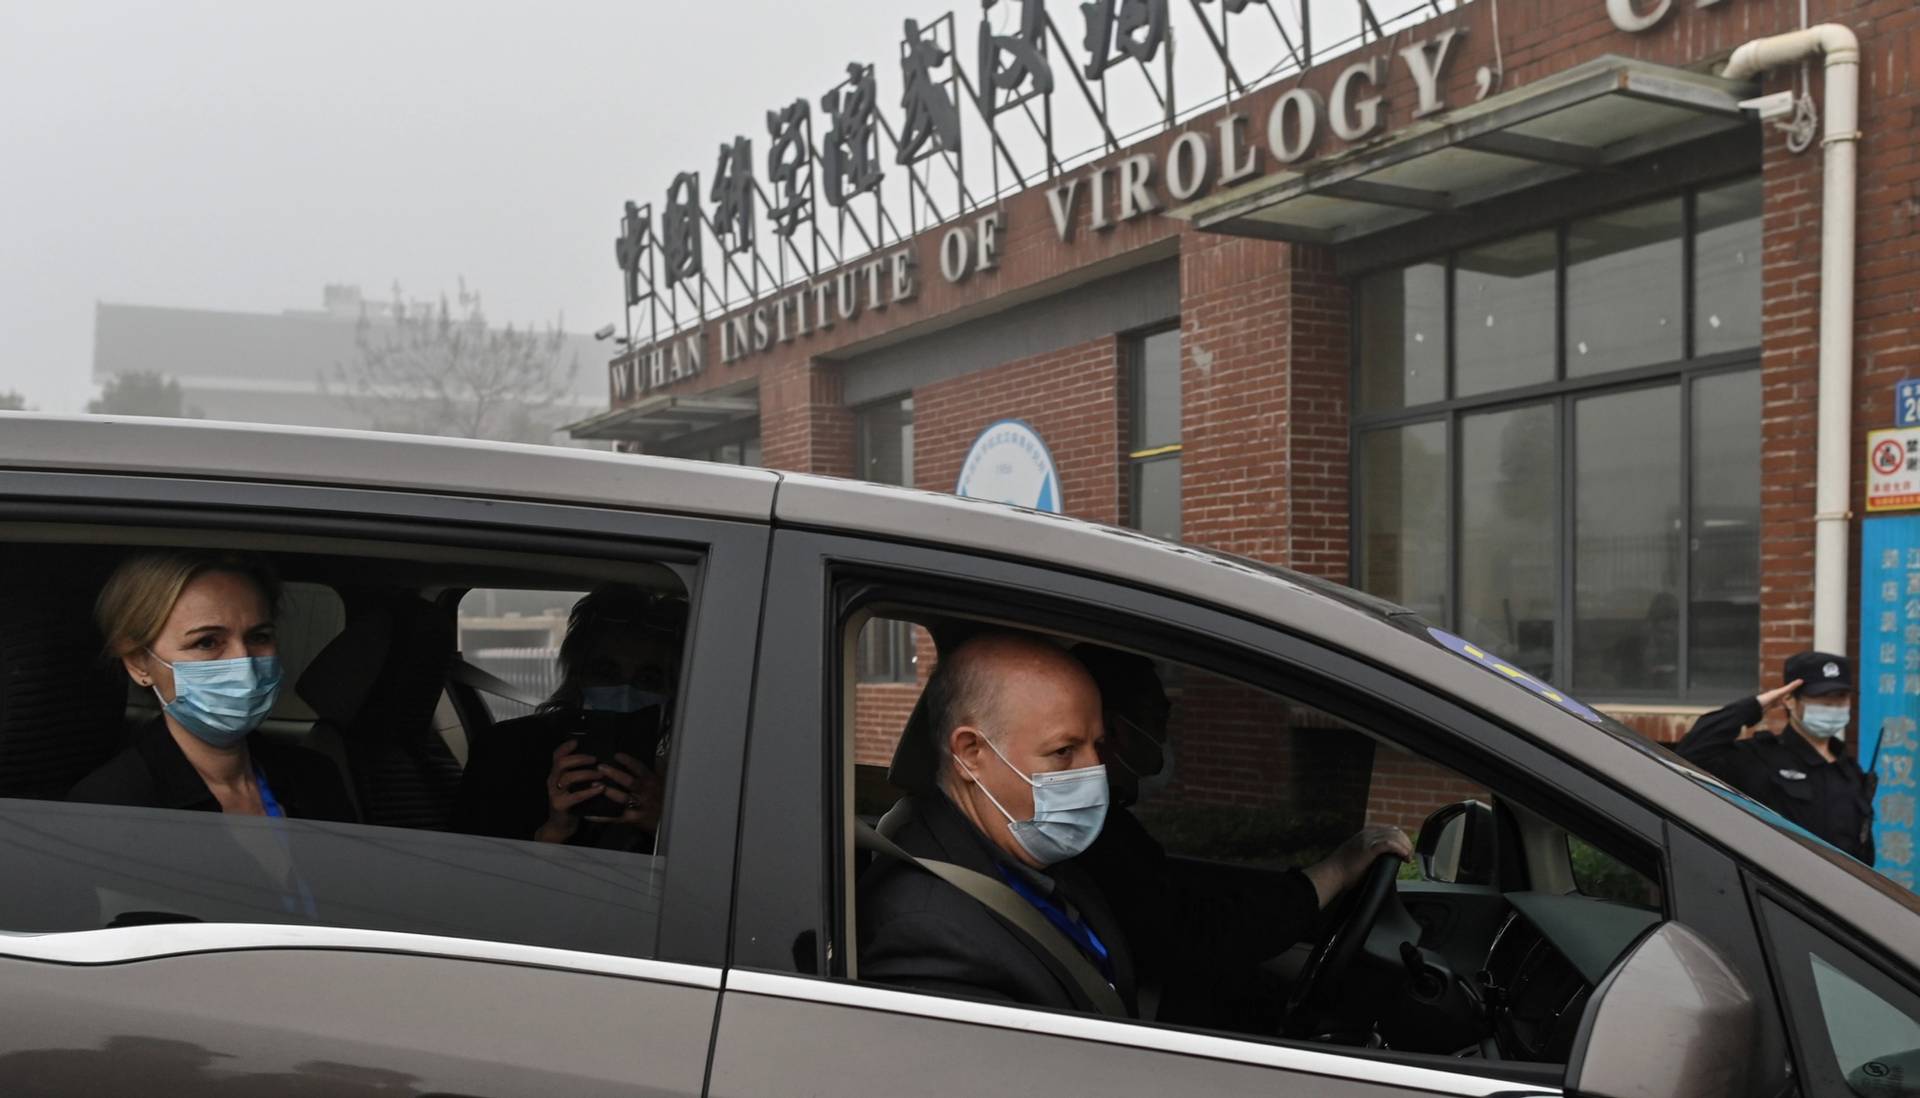 Peter Daszak, right, Thea Fischer, left, and other members of the World Health Organization team investigating the origins of COVID-19 arrive at the Wuhan Institute of Virology in China’s central Hubei province on Feb. 3, 2021